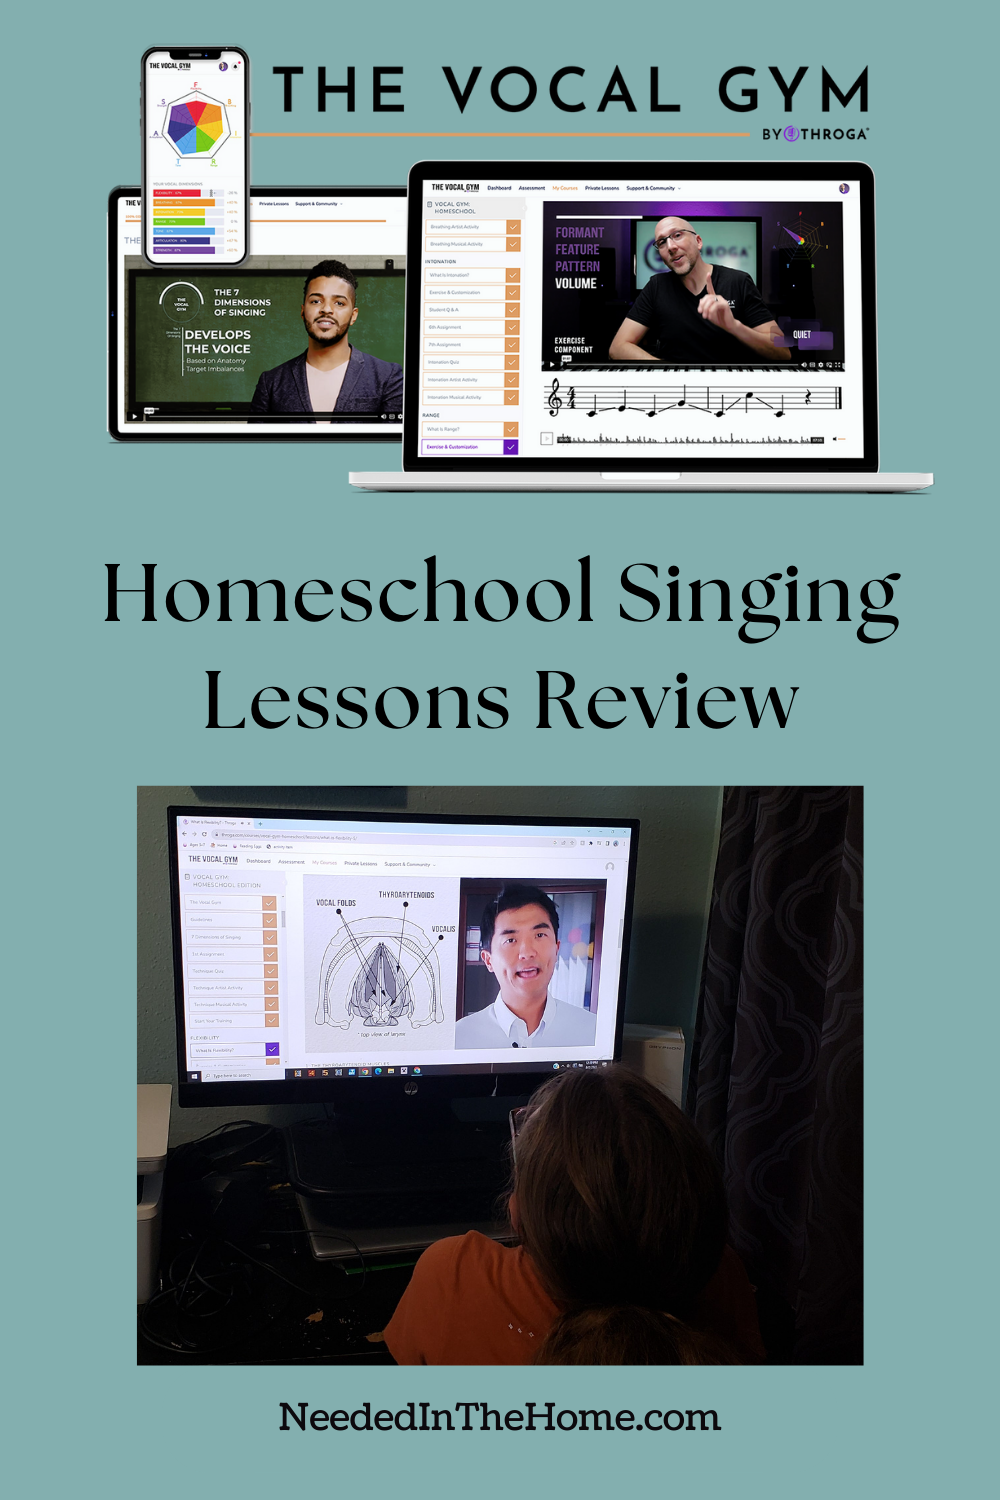 the vocal gym by throga homeschool singing lessons review mobile phone tablet laptop girl looking at monitor with instructor neededinthehome